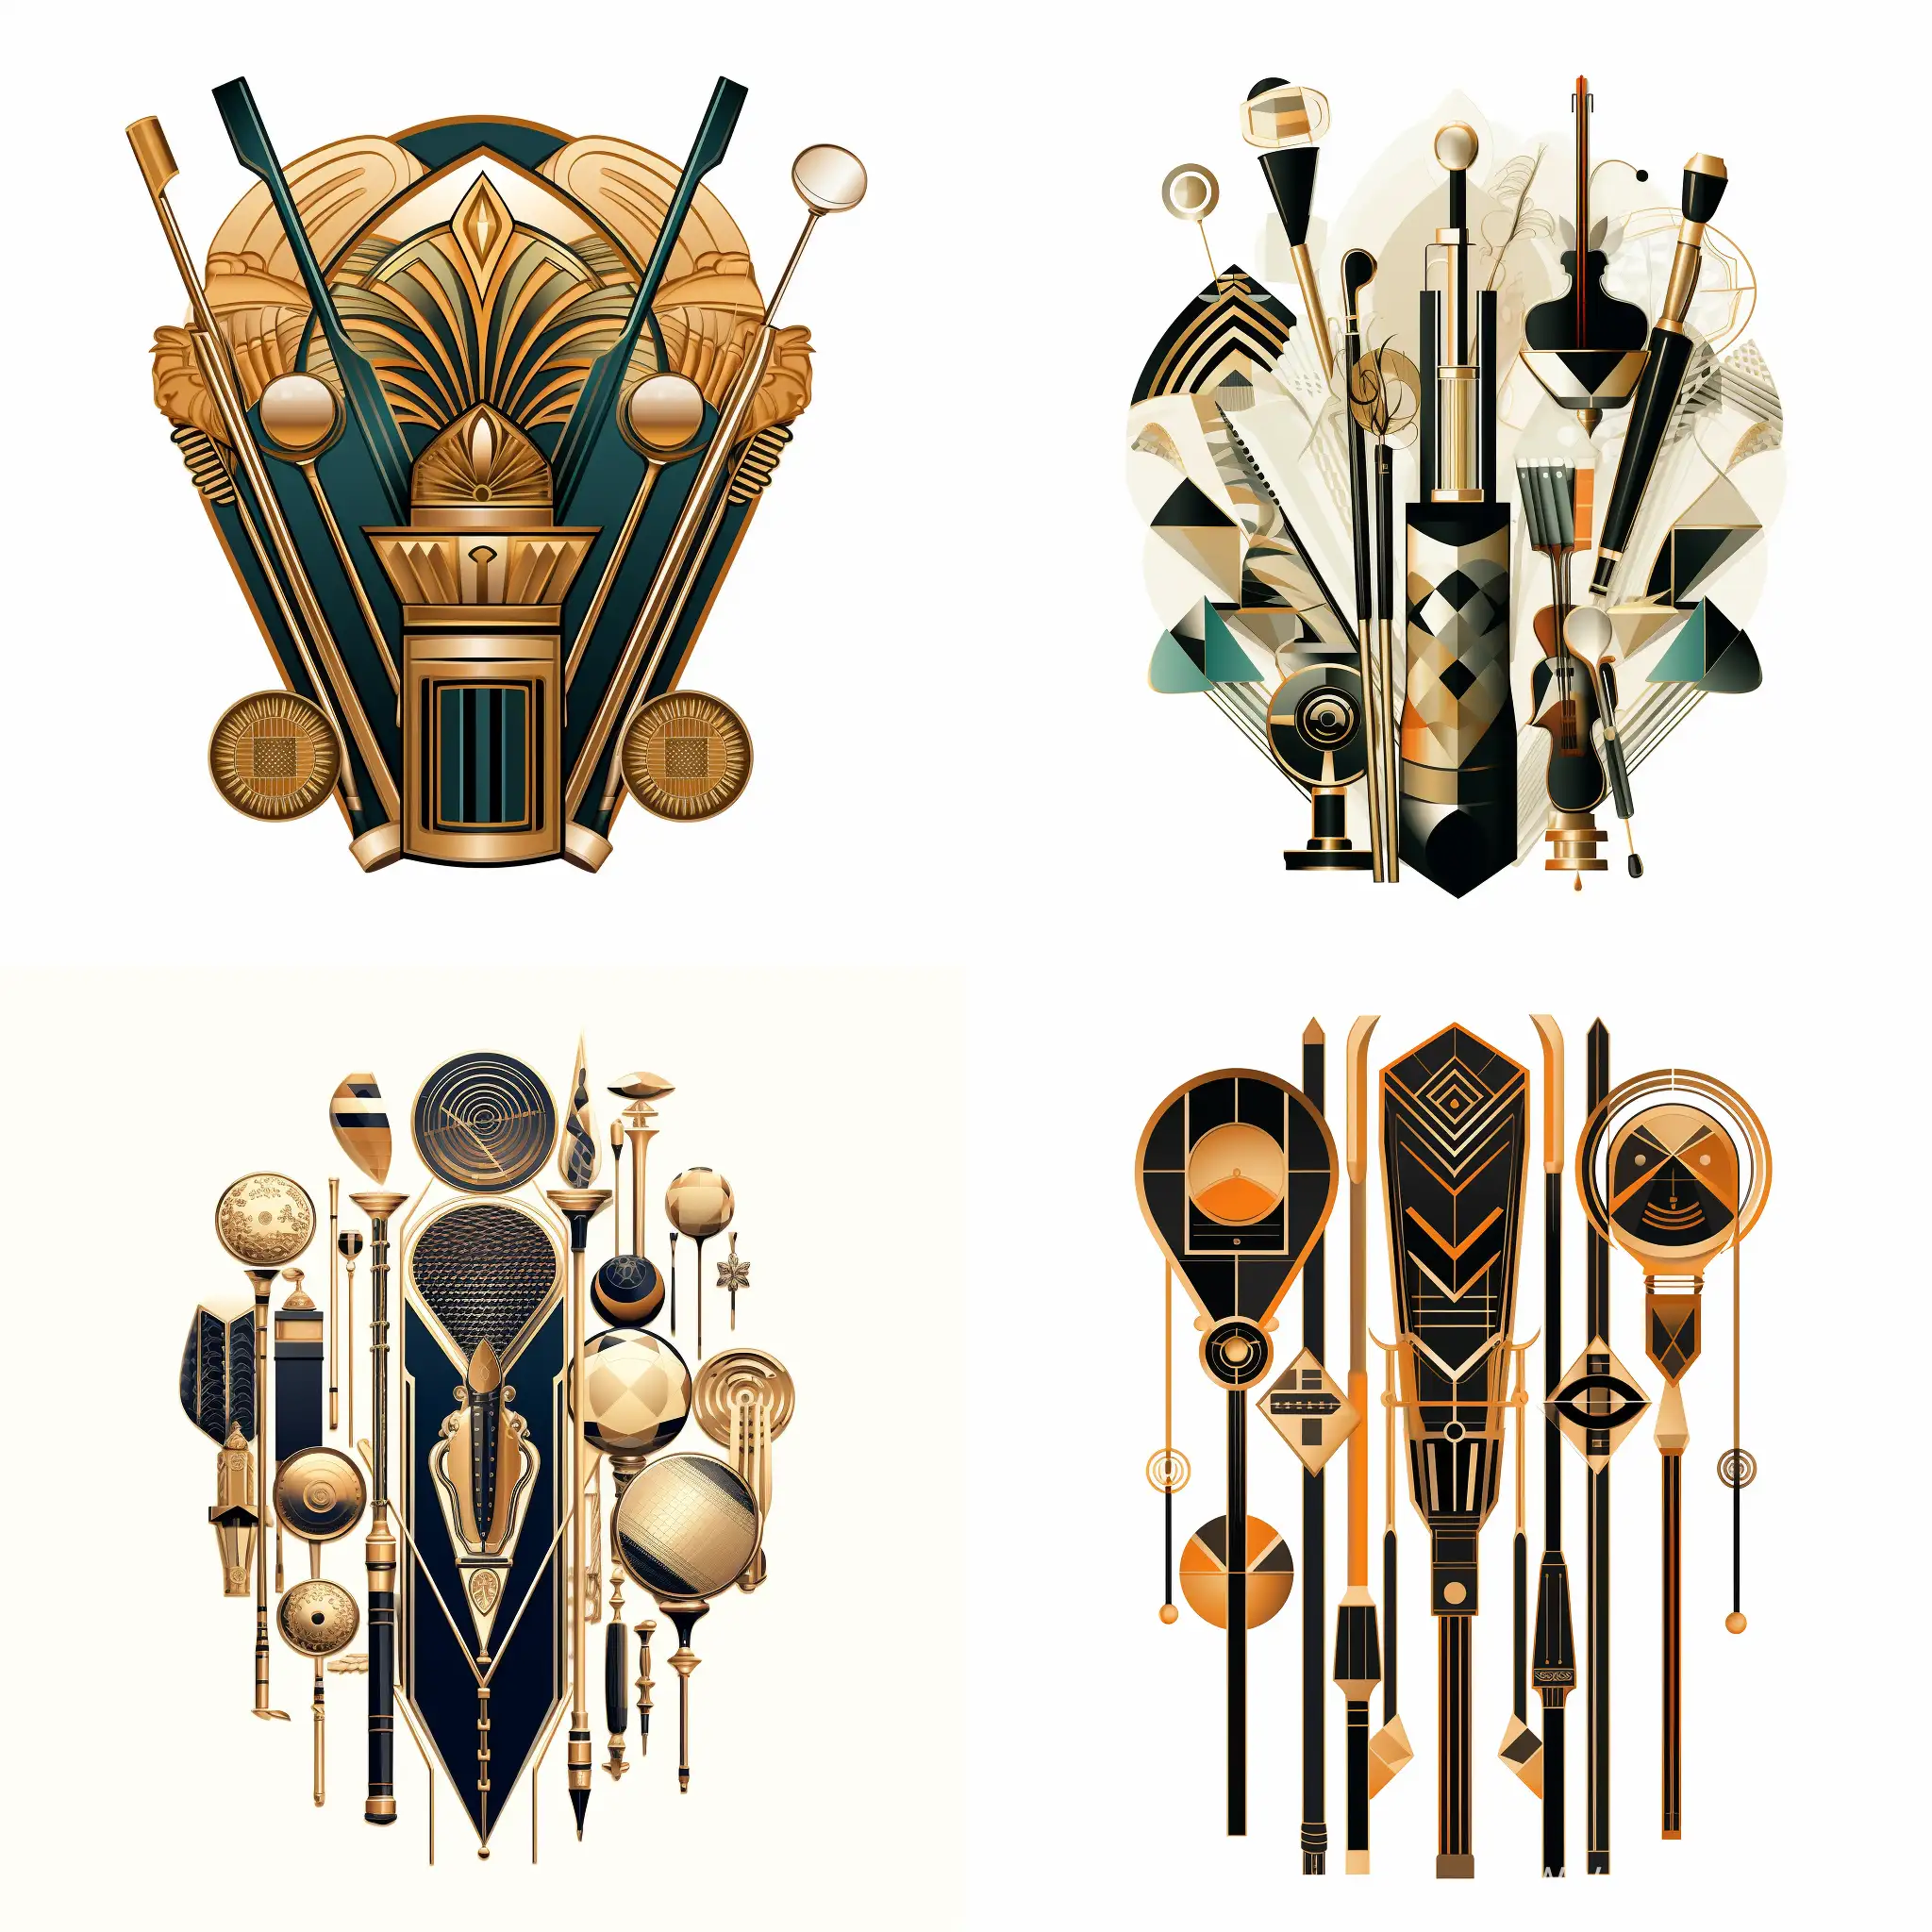 Art-Deco-Style-Clubs-on-White-Background